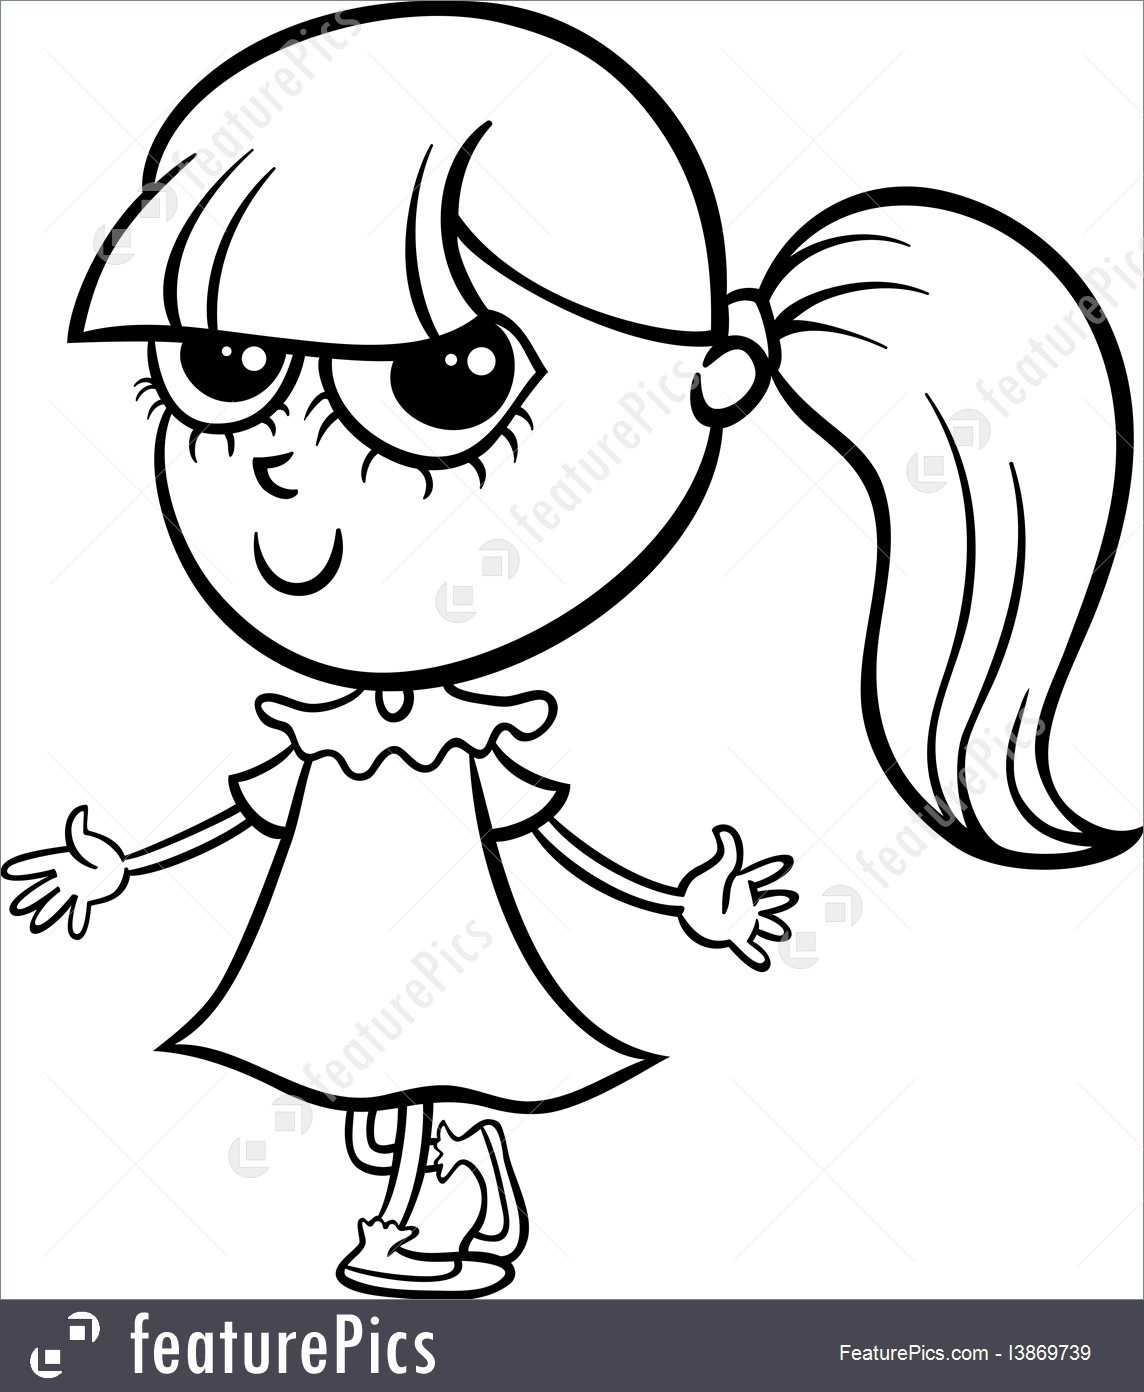 Girl Cartoon Coloring Pages
 Little Girl Cartoon Drawing at GetDrawings